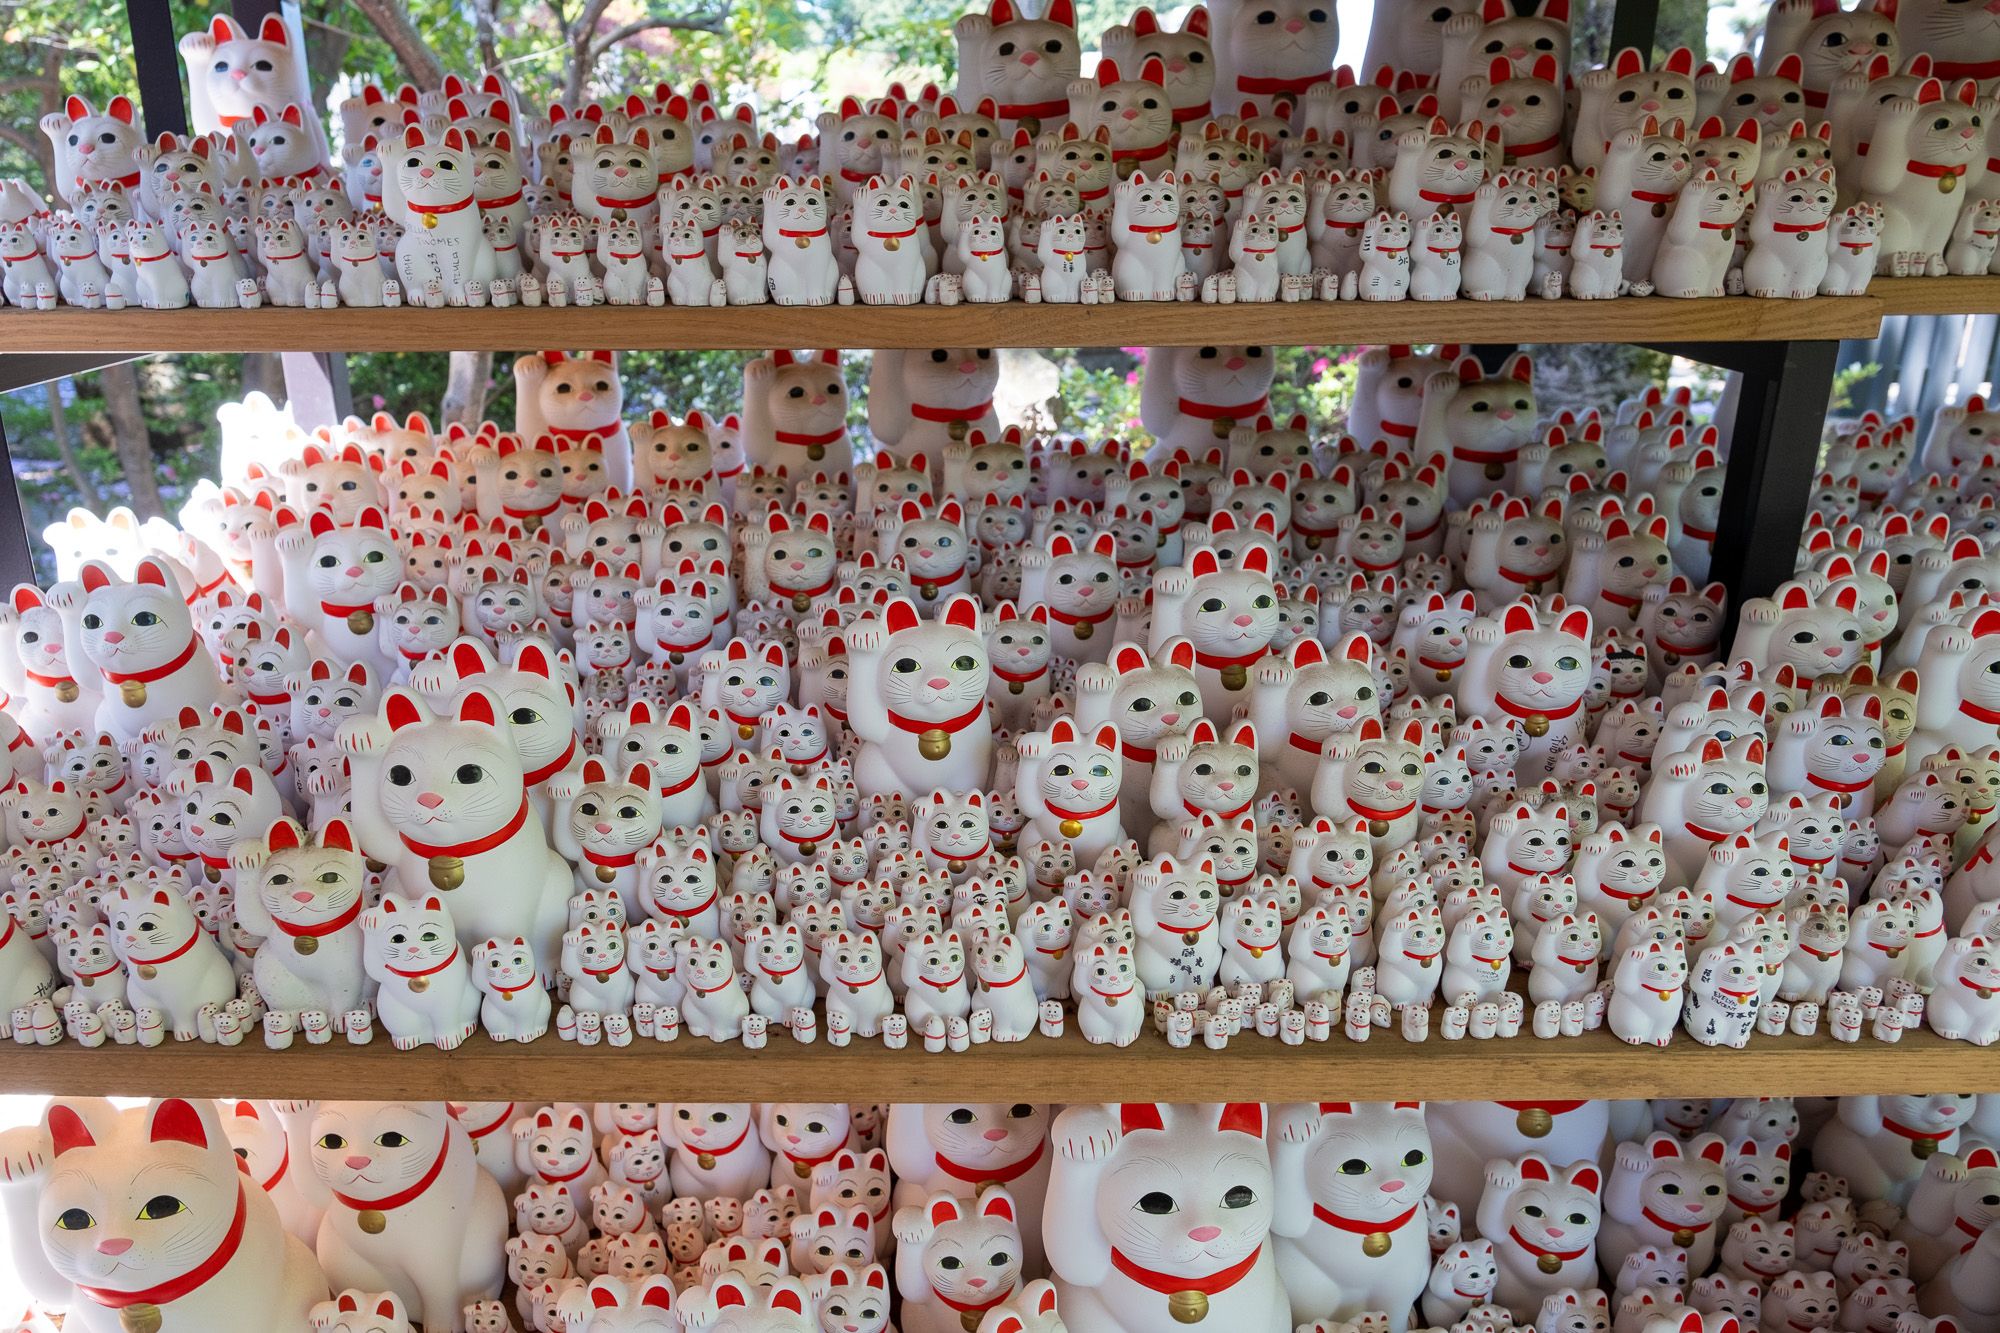 Tokyo's temple of kittens